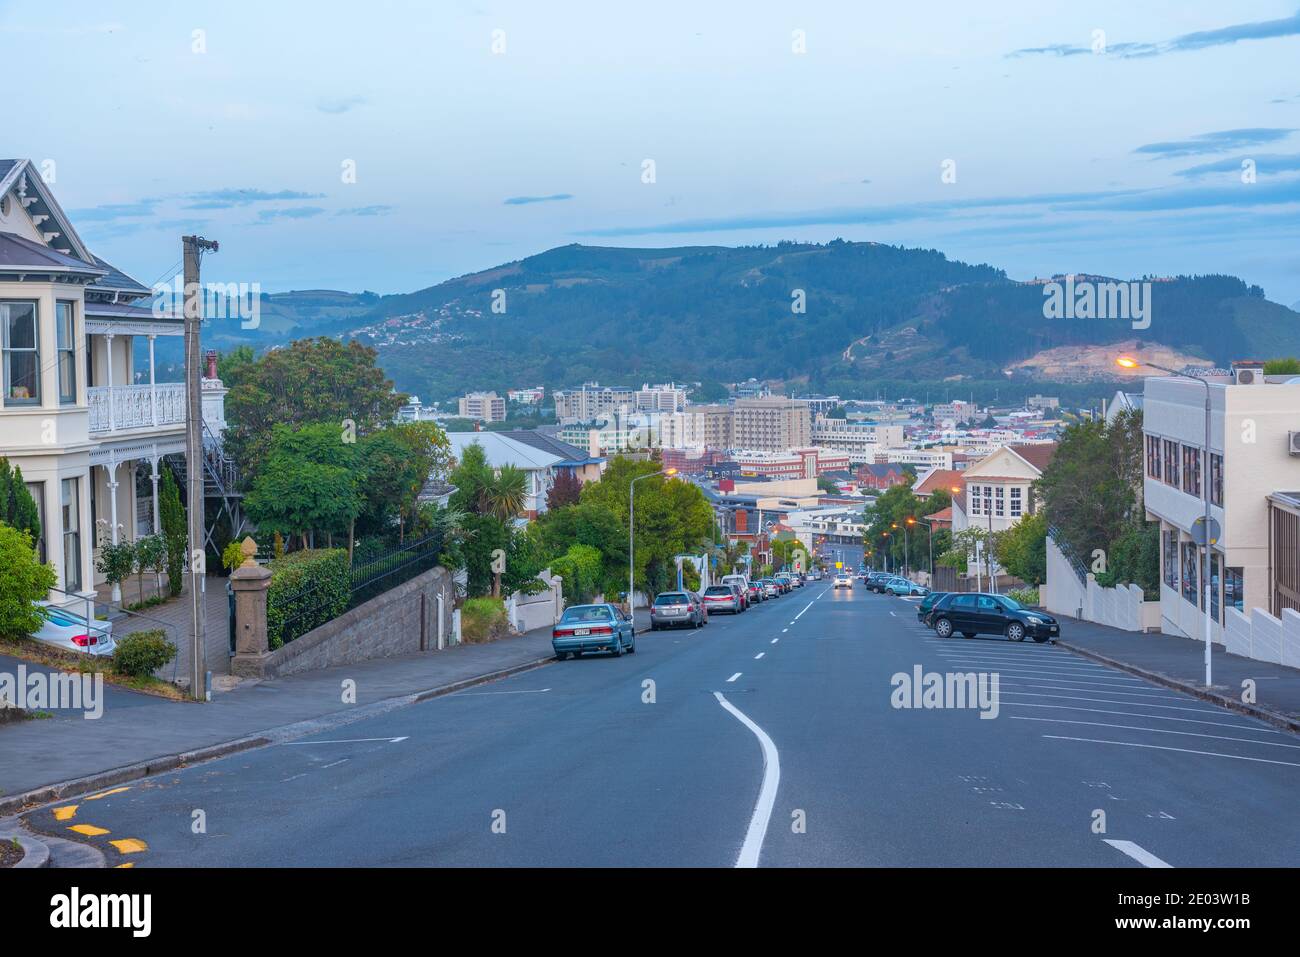 Aerial view of downtown Dunedin, New Zealand Stock Photo